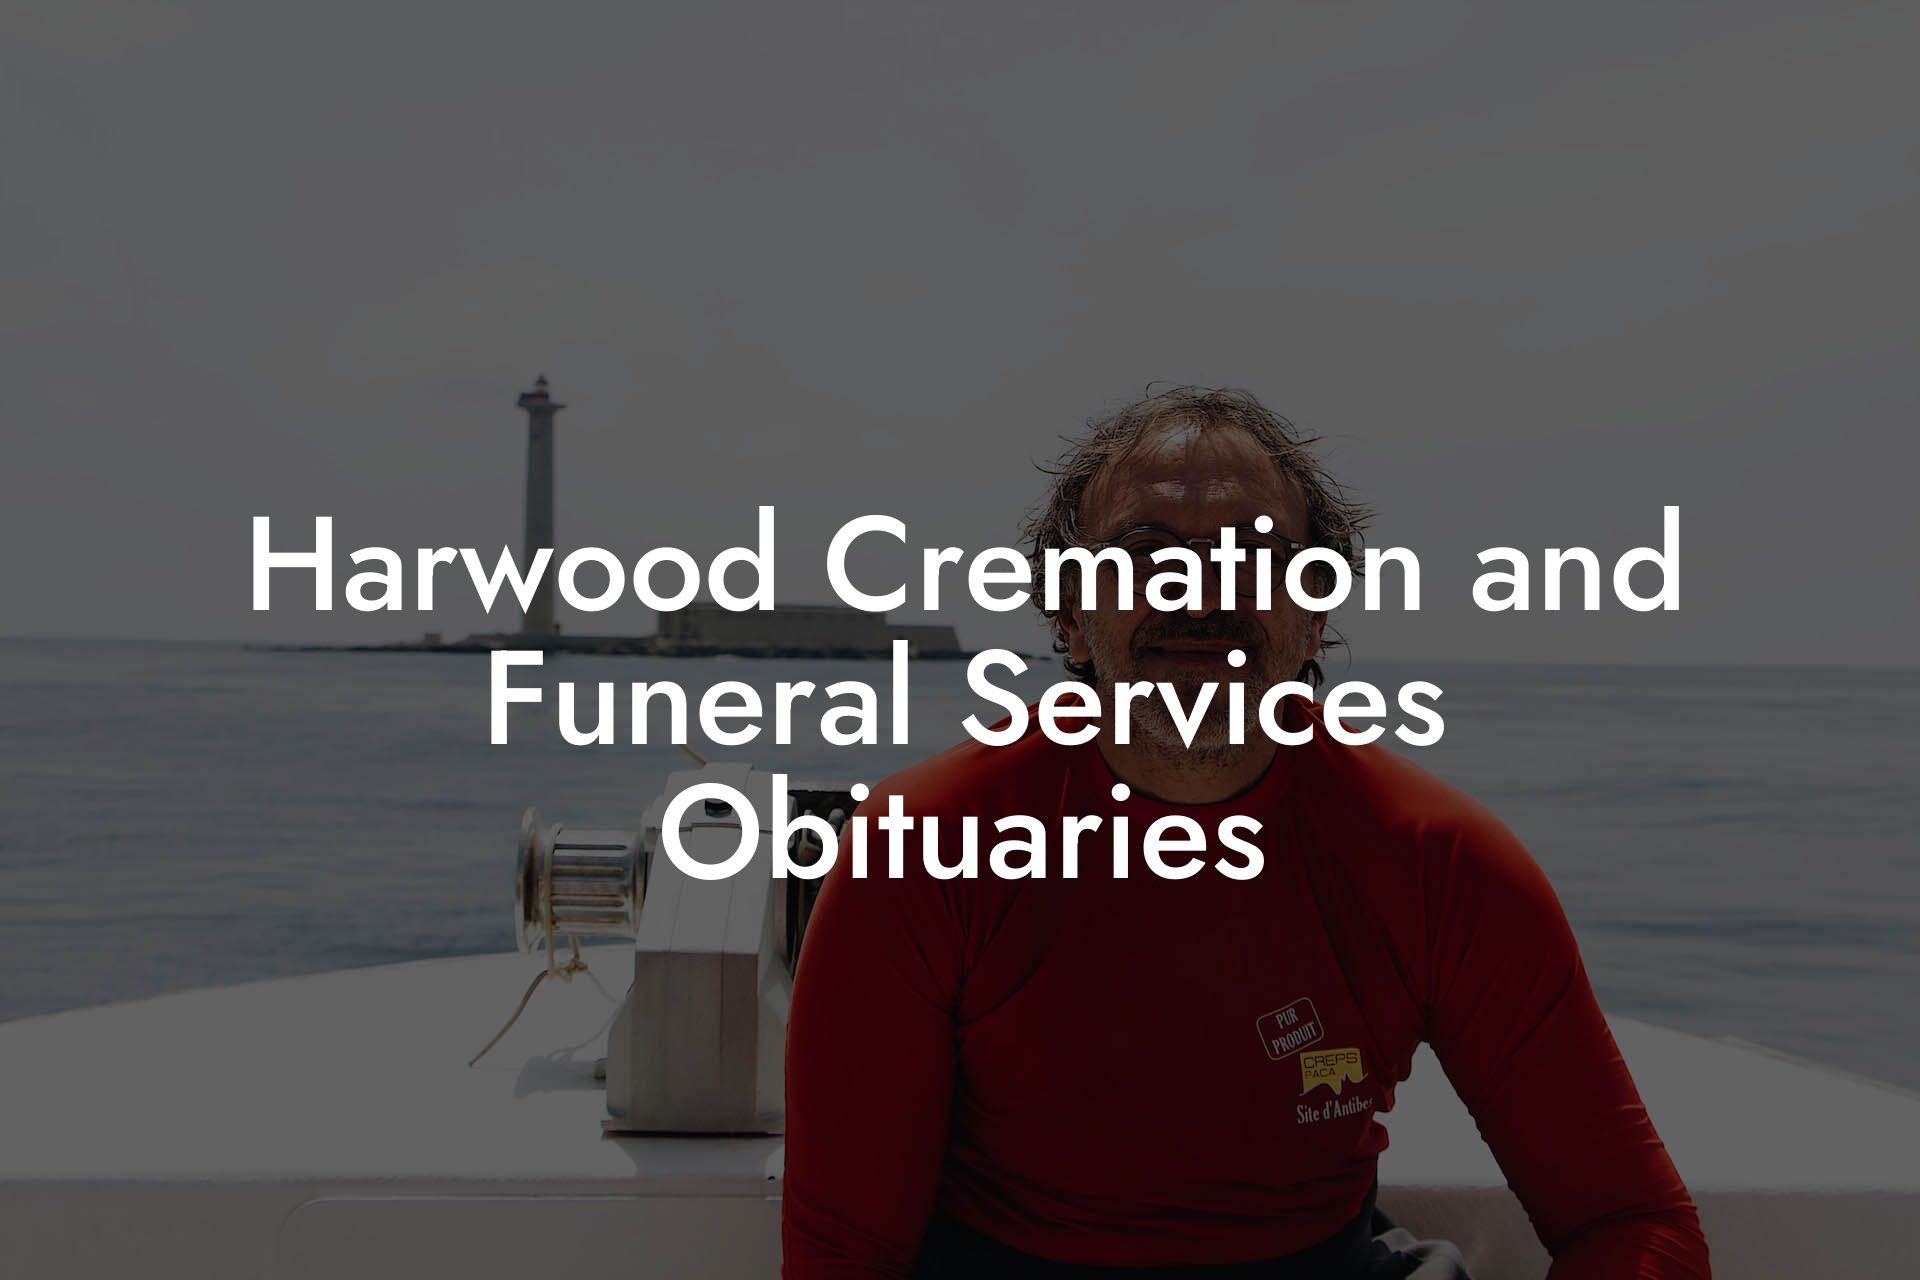 Harwood Cremation and Funeral Services Obituaries